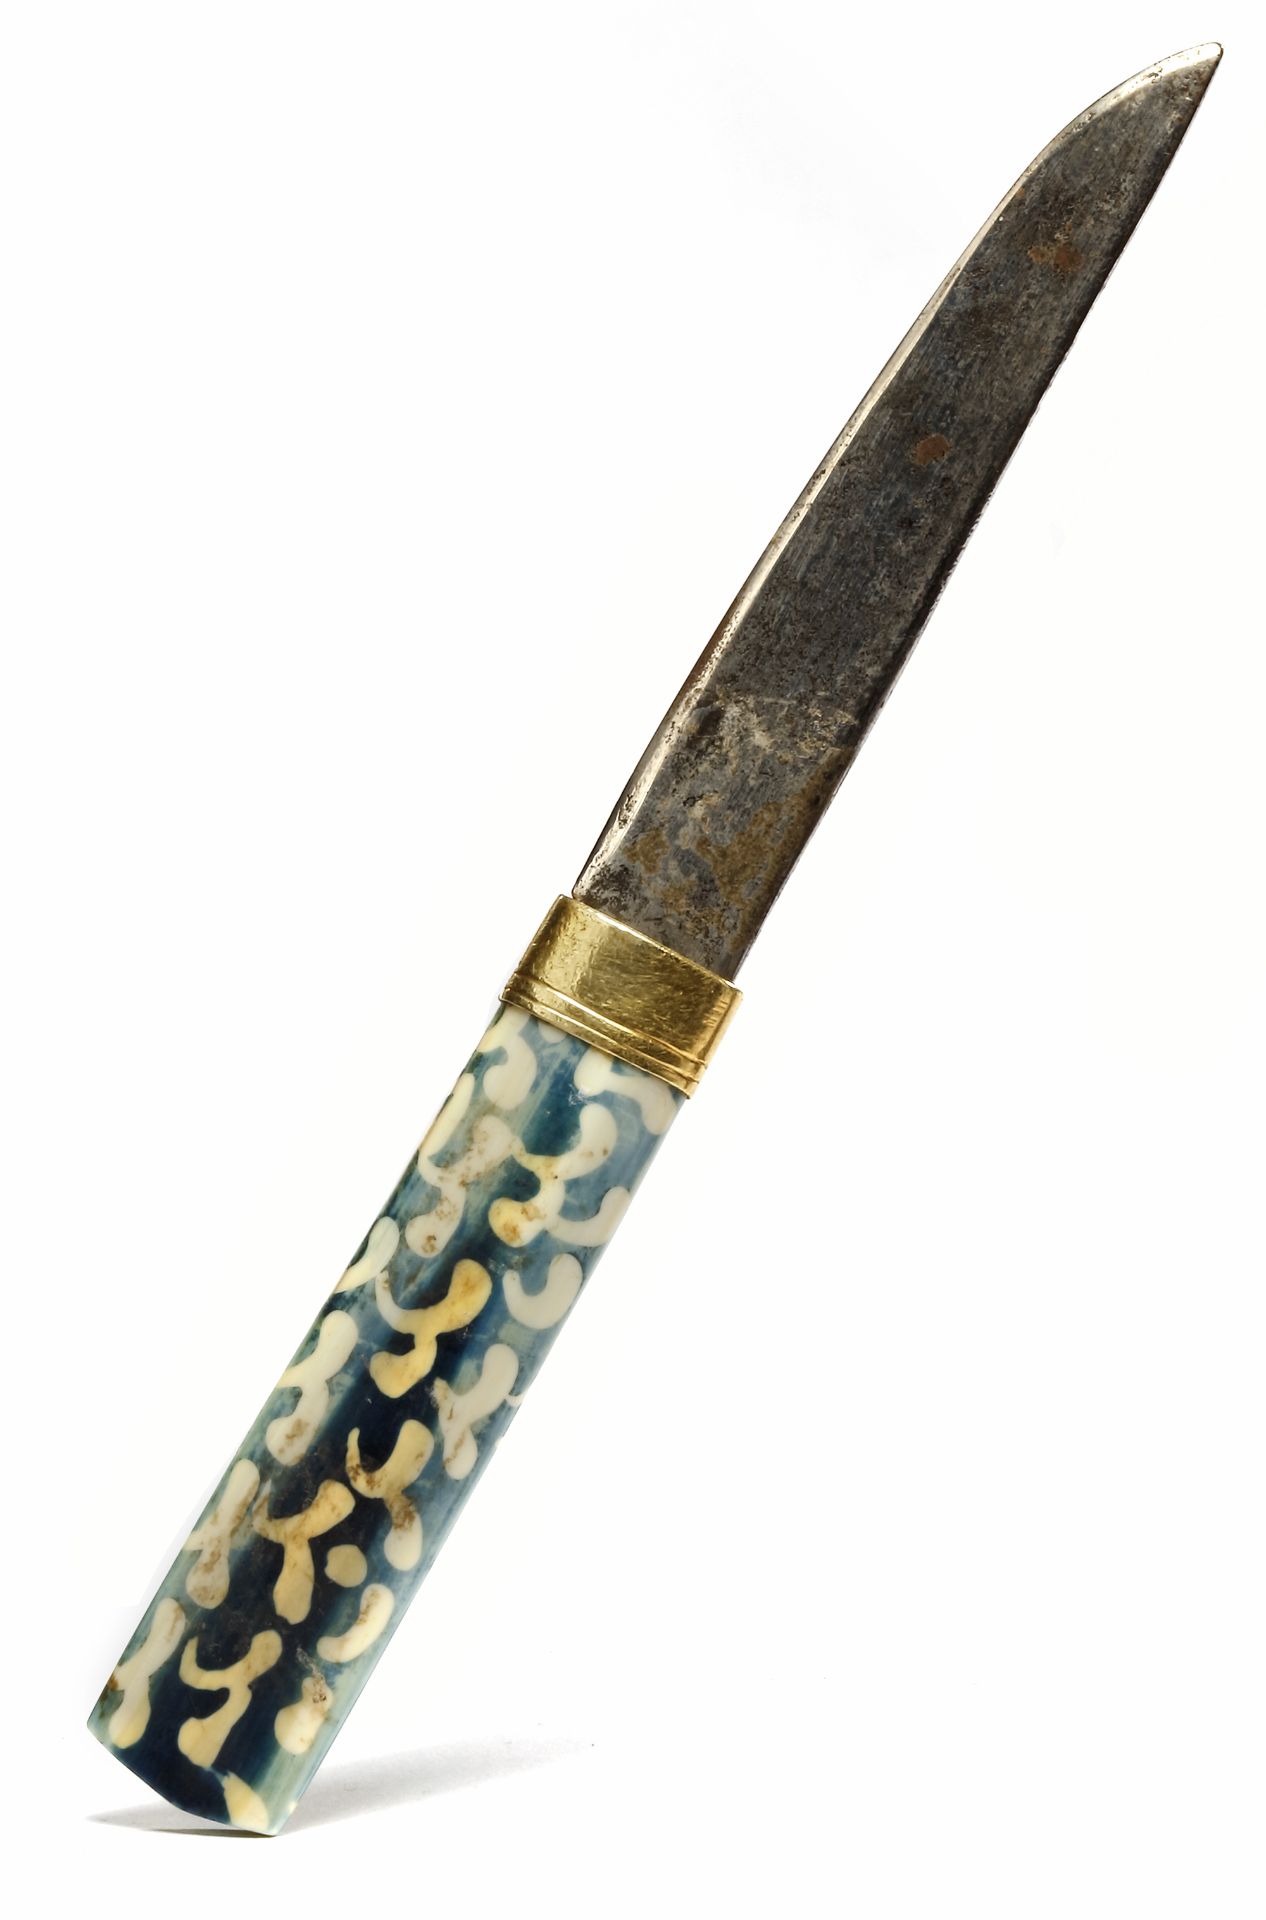 A SMALL INSCRIBED KNIFE, LATE TIMURID, 15TH-16TH CENTURY - Image 4 of 12